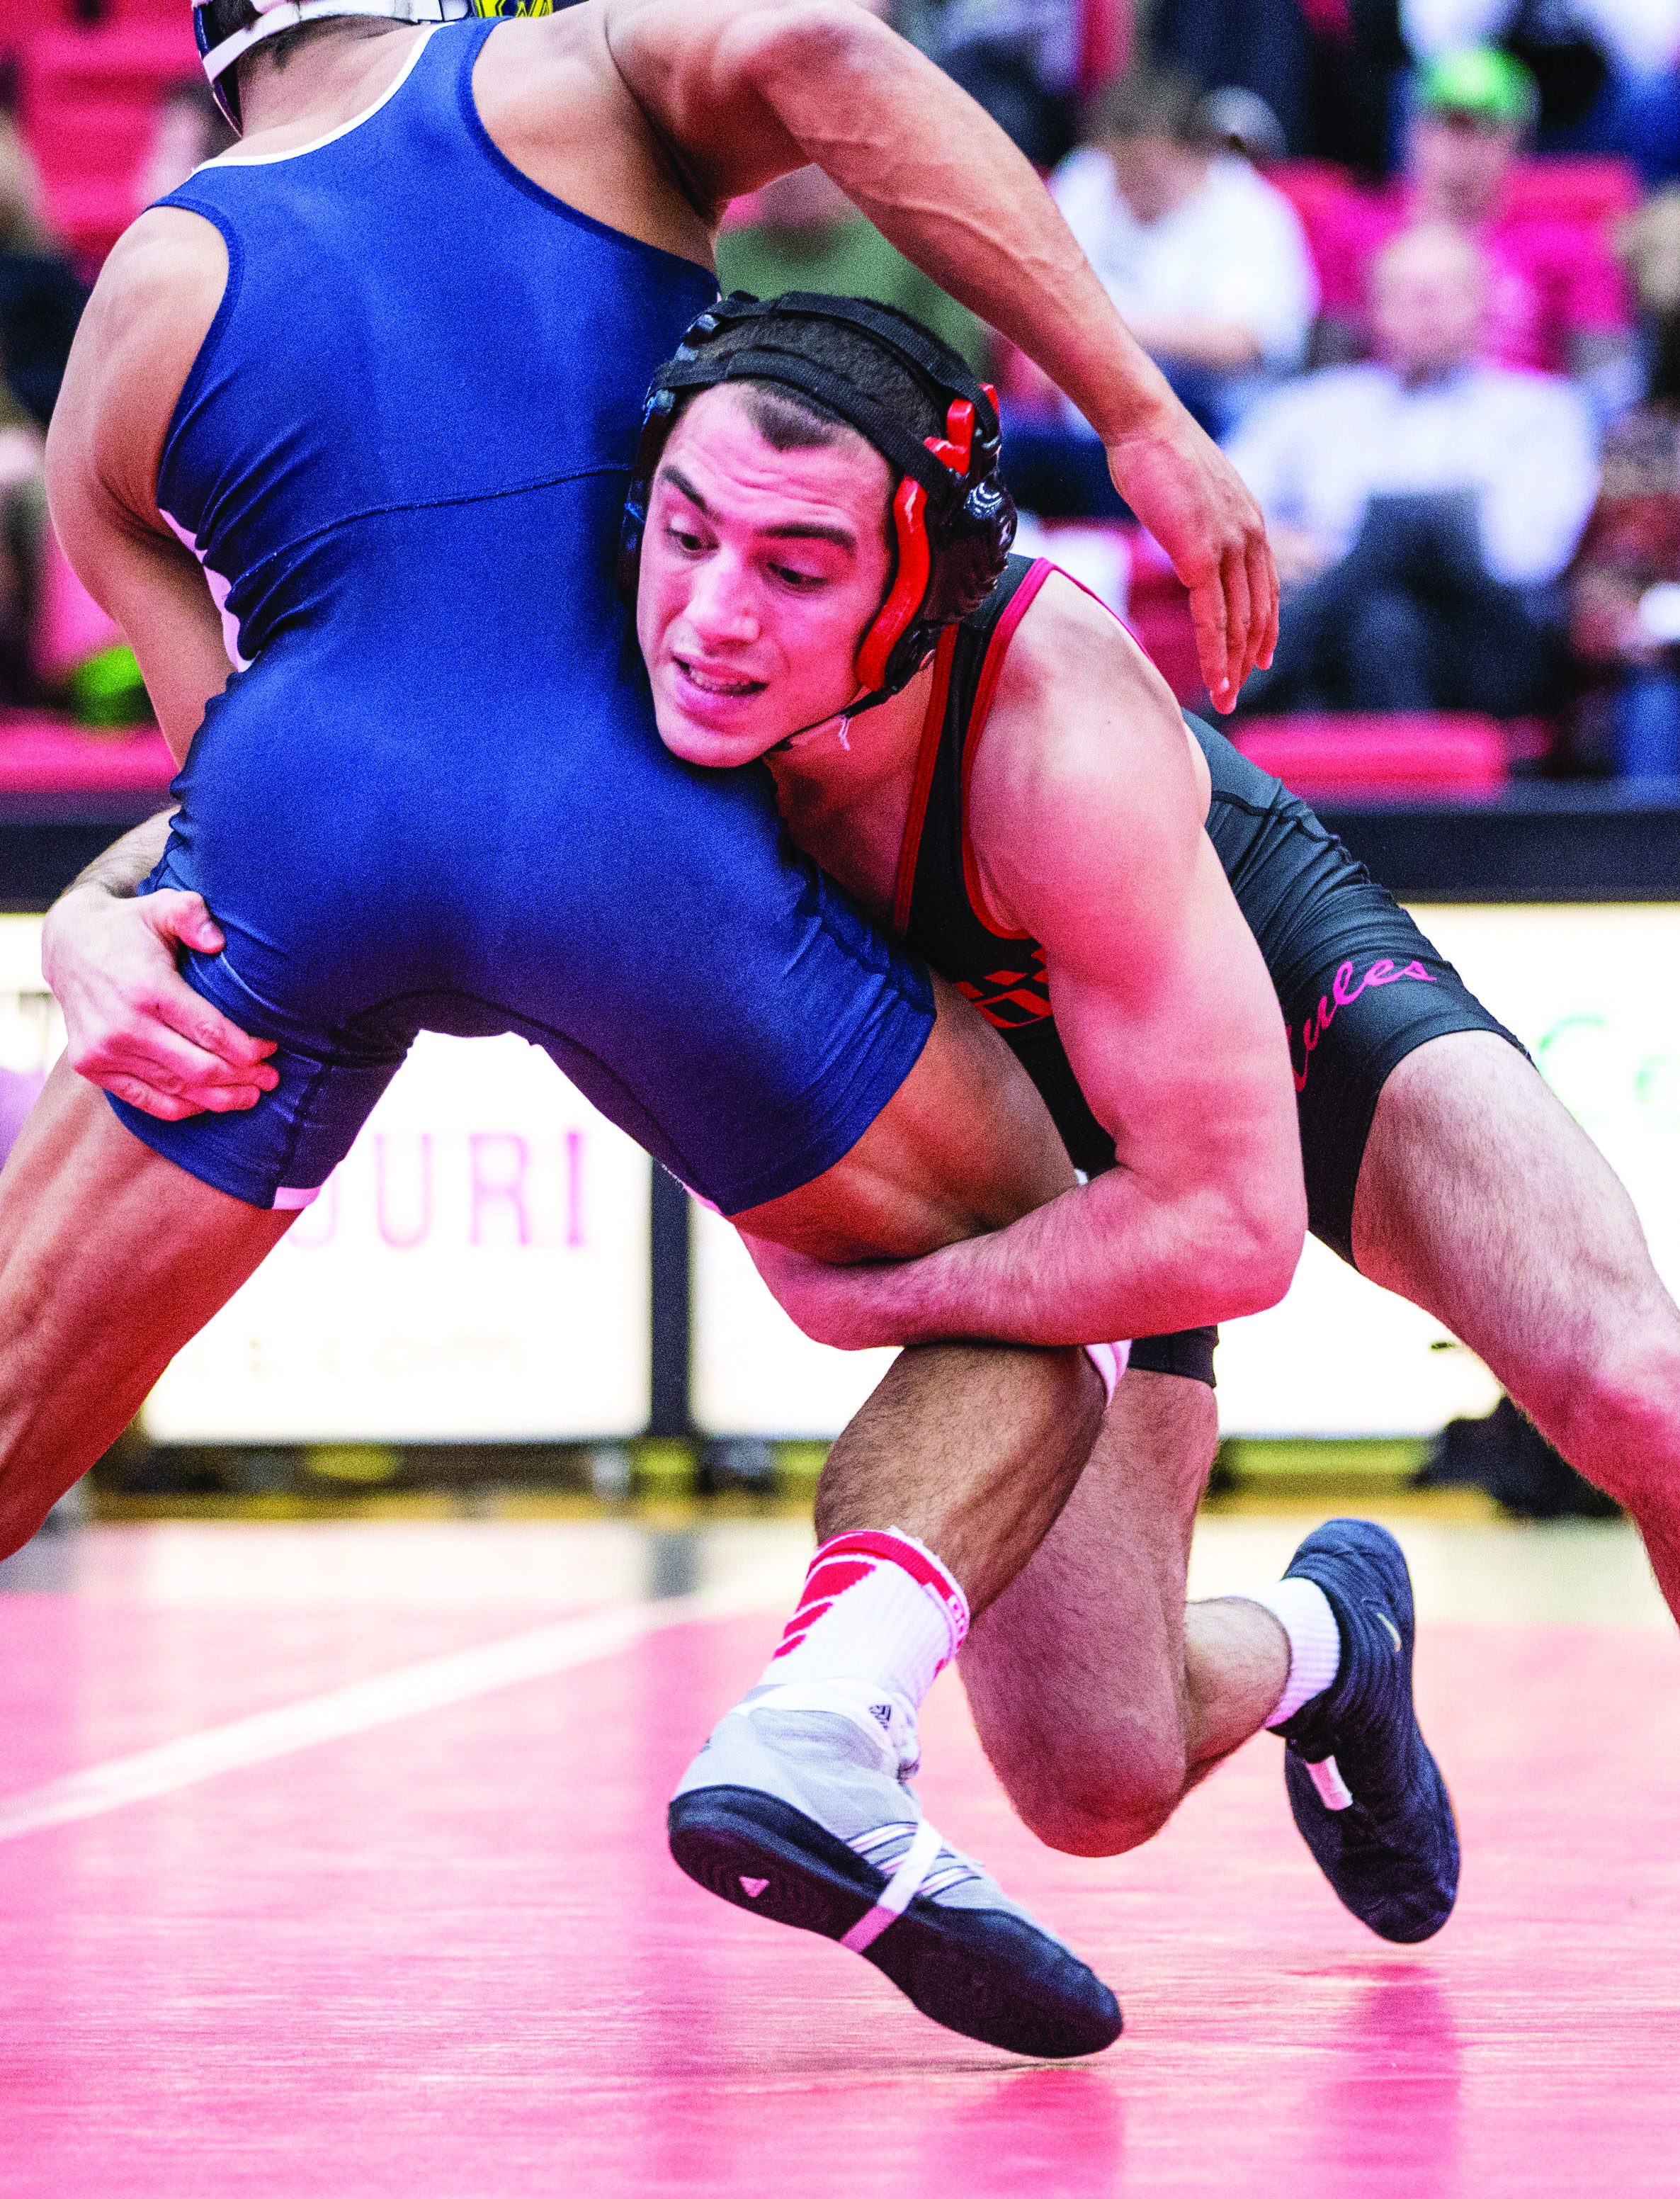 Redshirt junior Nick Viterisi wrestles during a home match. (Photo by ANDREW MATHER, Photo Editor)